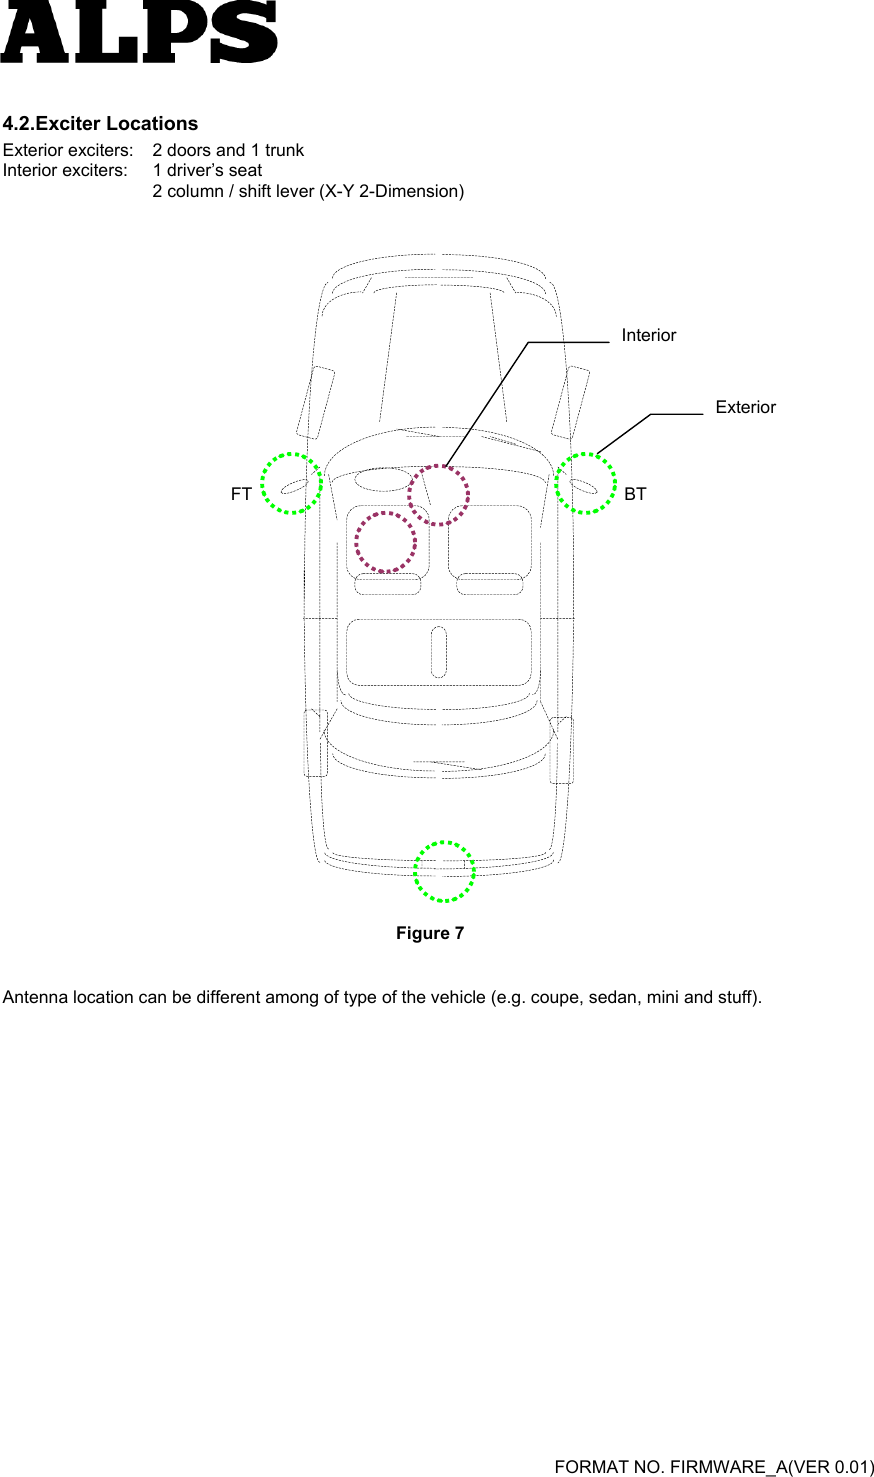   FORMAT NO. FIRMWARE_A(VER 0.01) 4.2.Exciter Locations Exterior exciters:  2 doors and 1 trunk Interior exciters:  1 driver’s seat     2 column / shift lever (X-Y 2-Dimension)                                    Figure 7  Antenna location can be different among of type of the vehicle (e.g. coupe, sedan, mini and stuff).     Exterior Interior FT BT